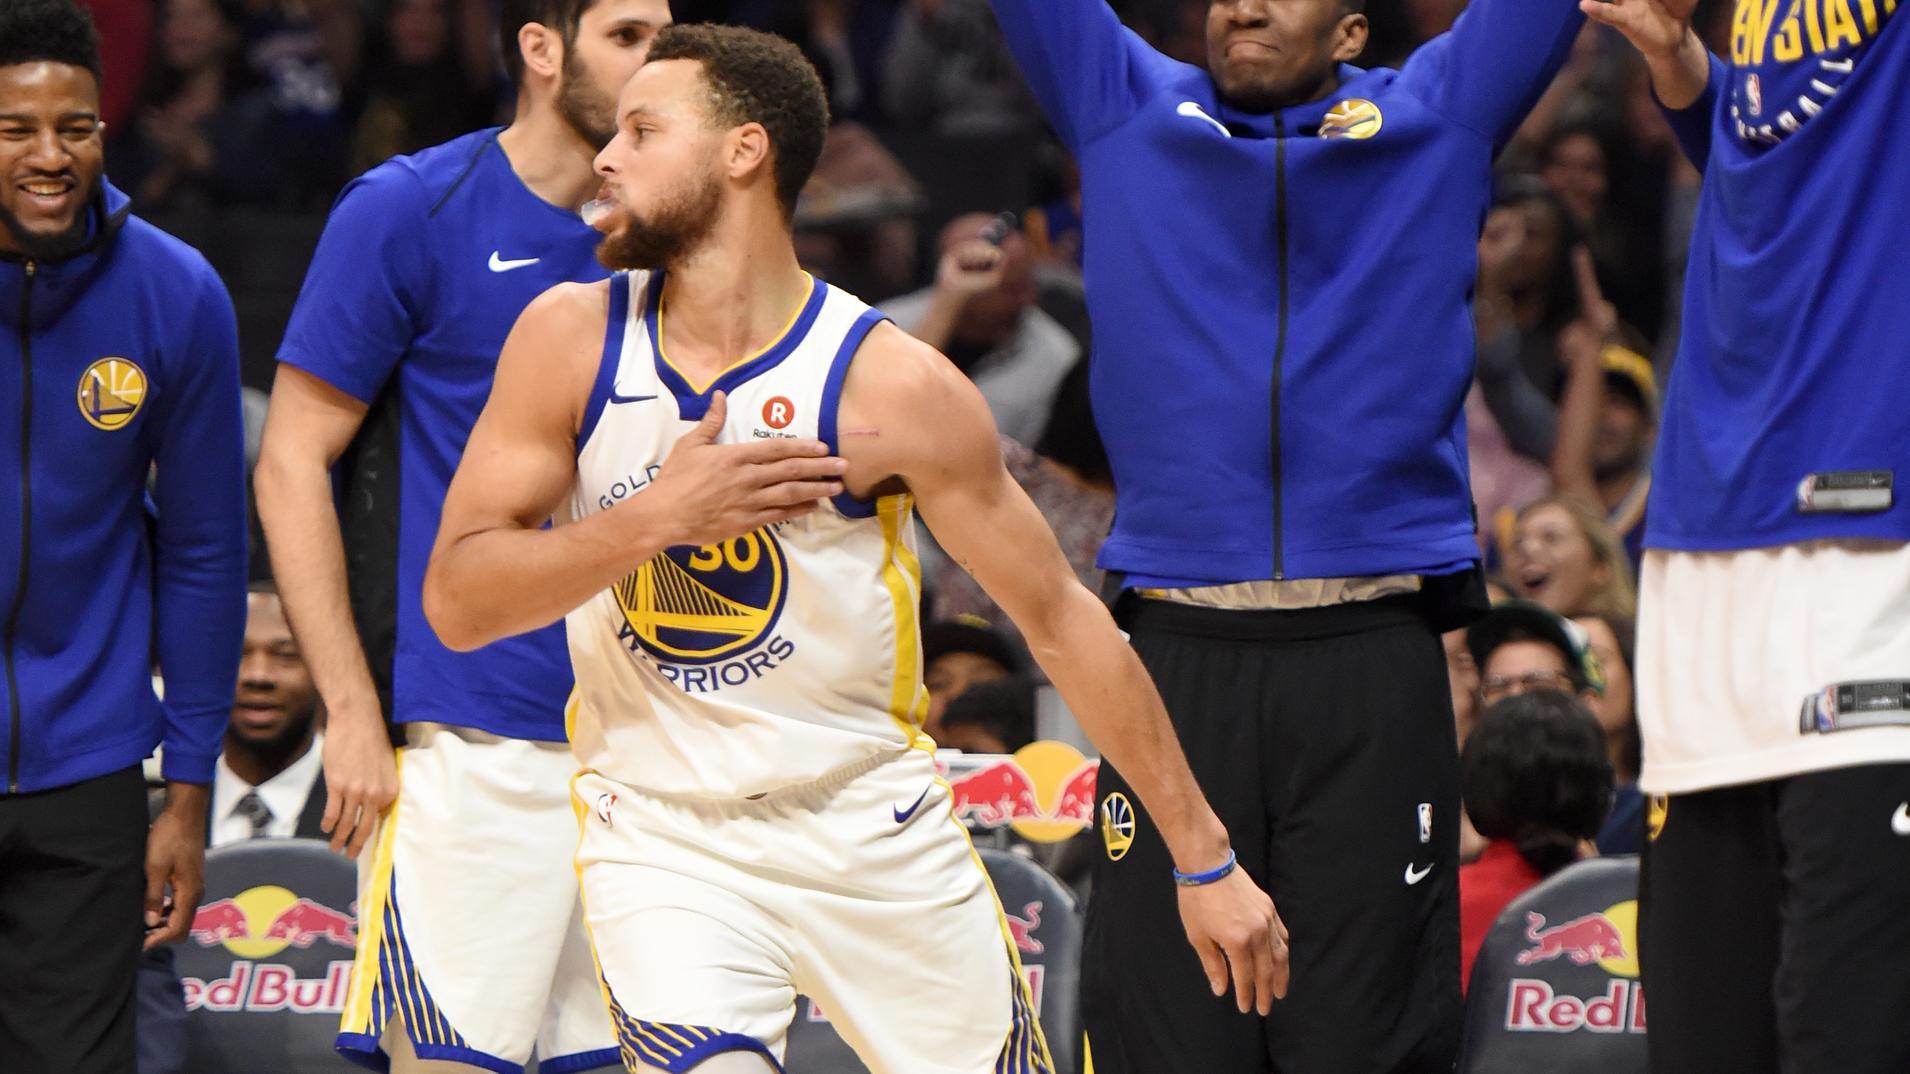 Steph Curry nets seasonhigh 45 points in three quarters as Warrior